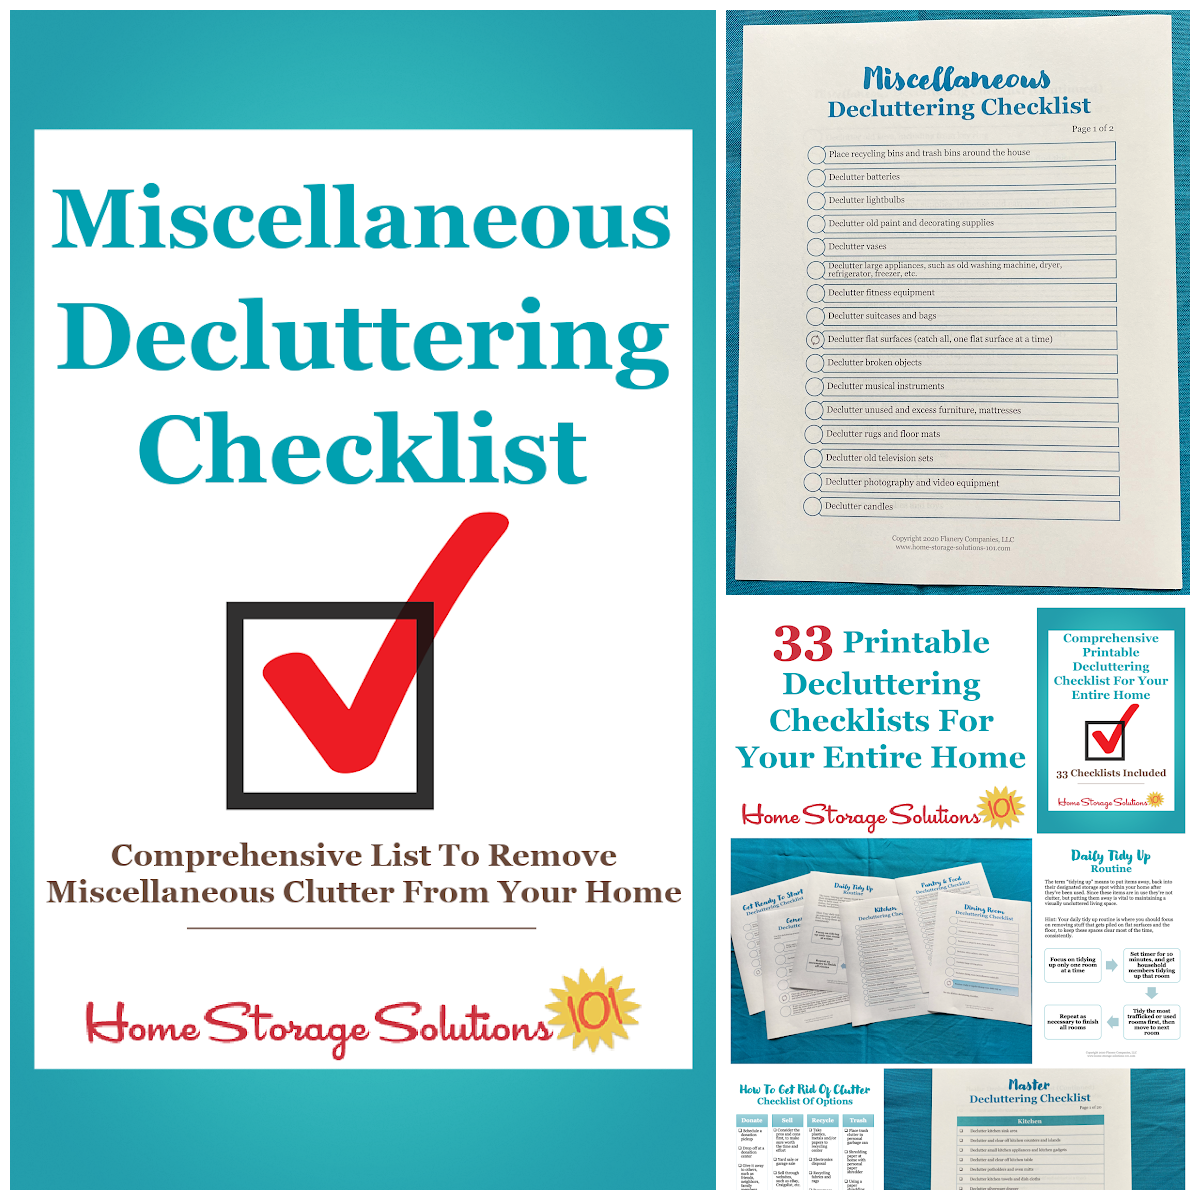 Get this miscellaneous decluttering checklist and 32 other decluttering checklists for your home {on Home Storage Solutions 101}